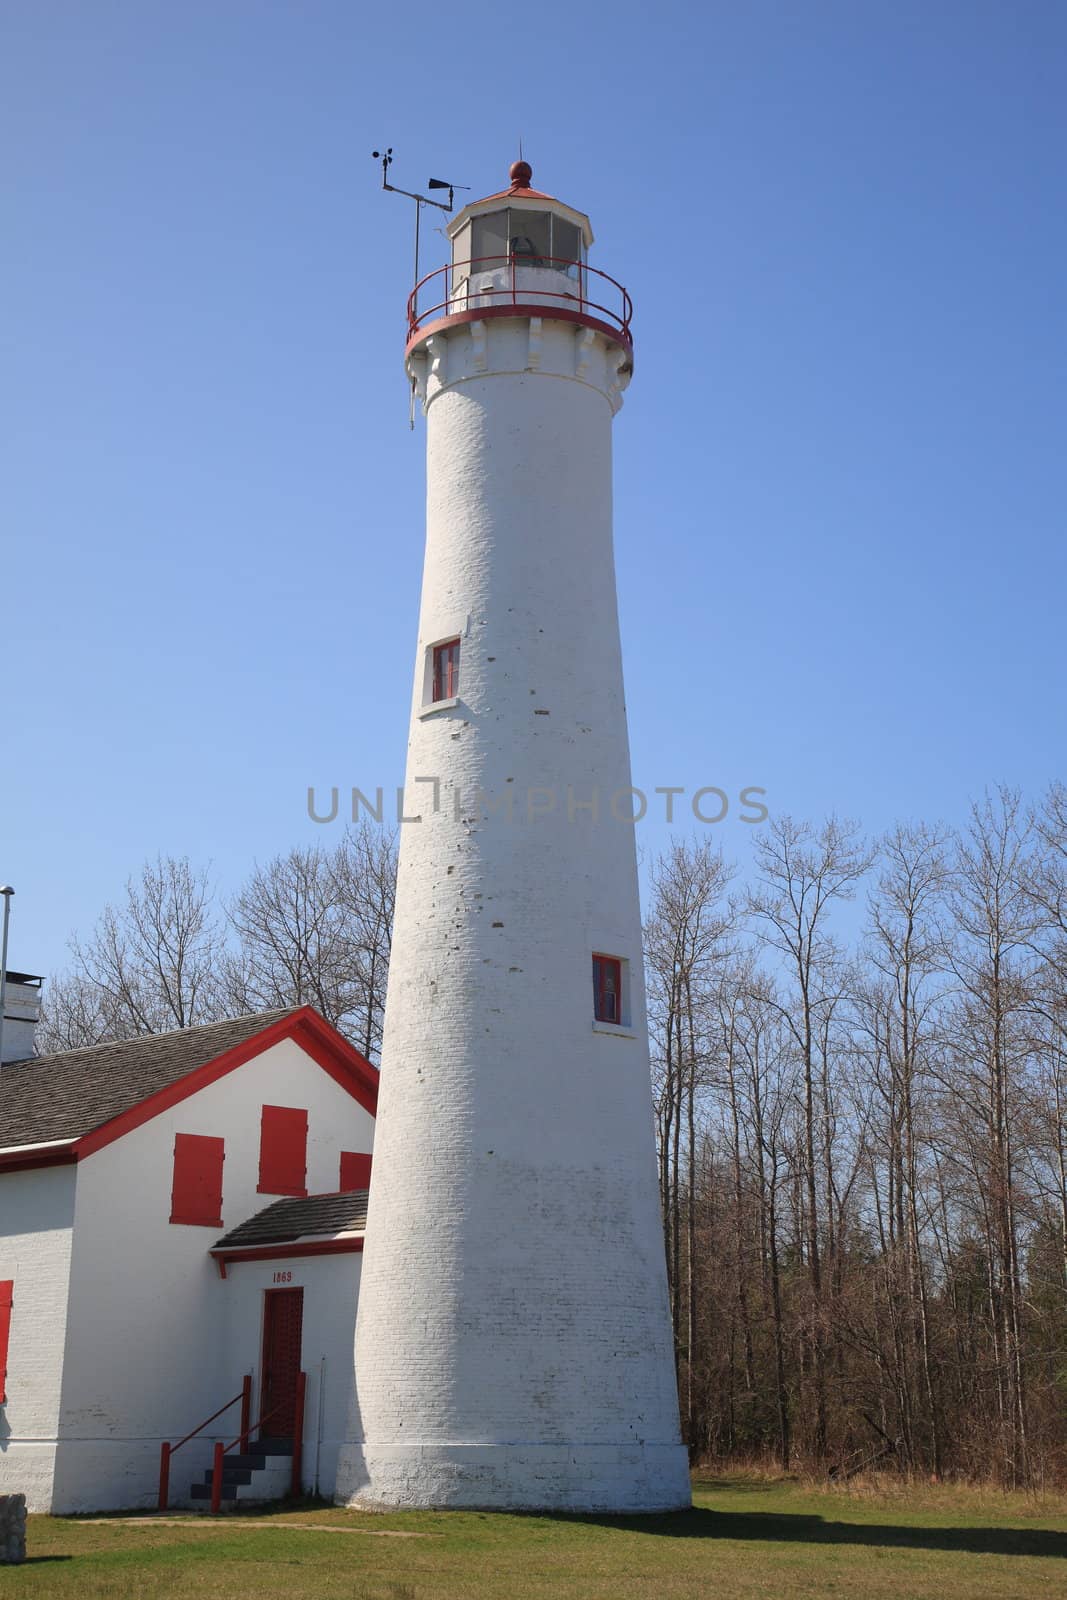 Lighthouse - Sturgeon Point, Michigan by Ffooter